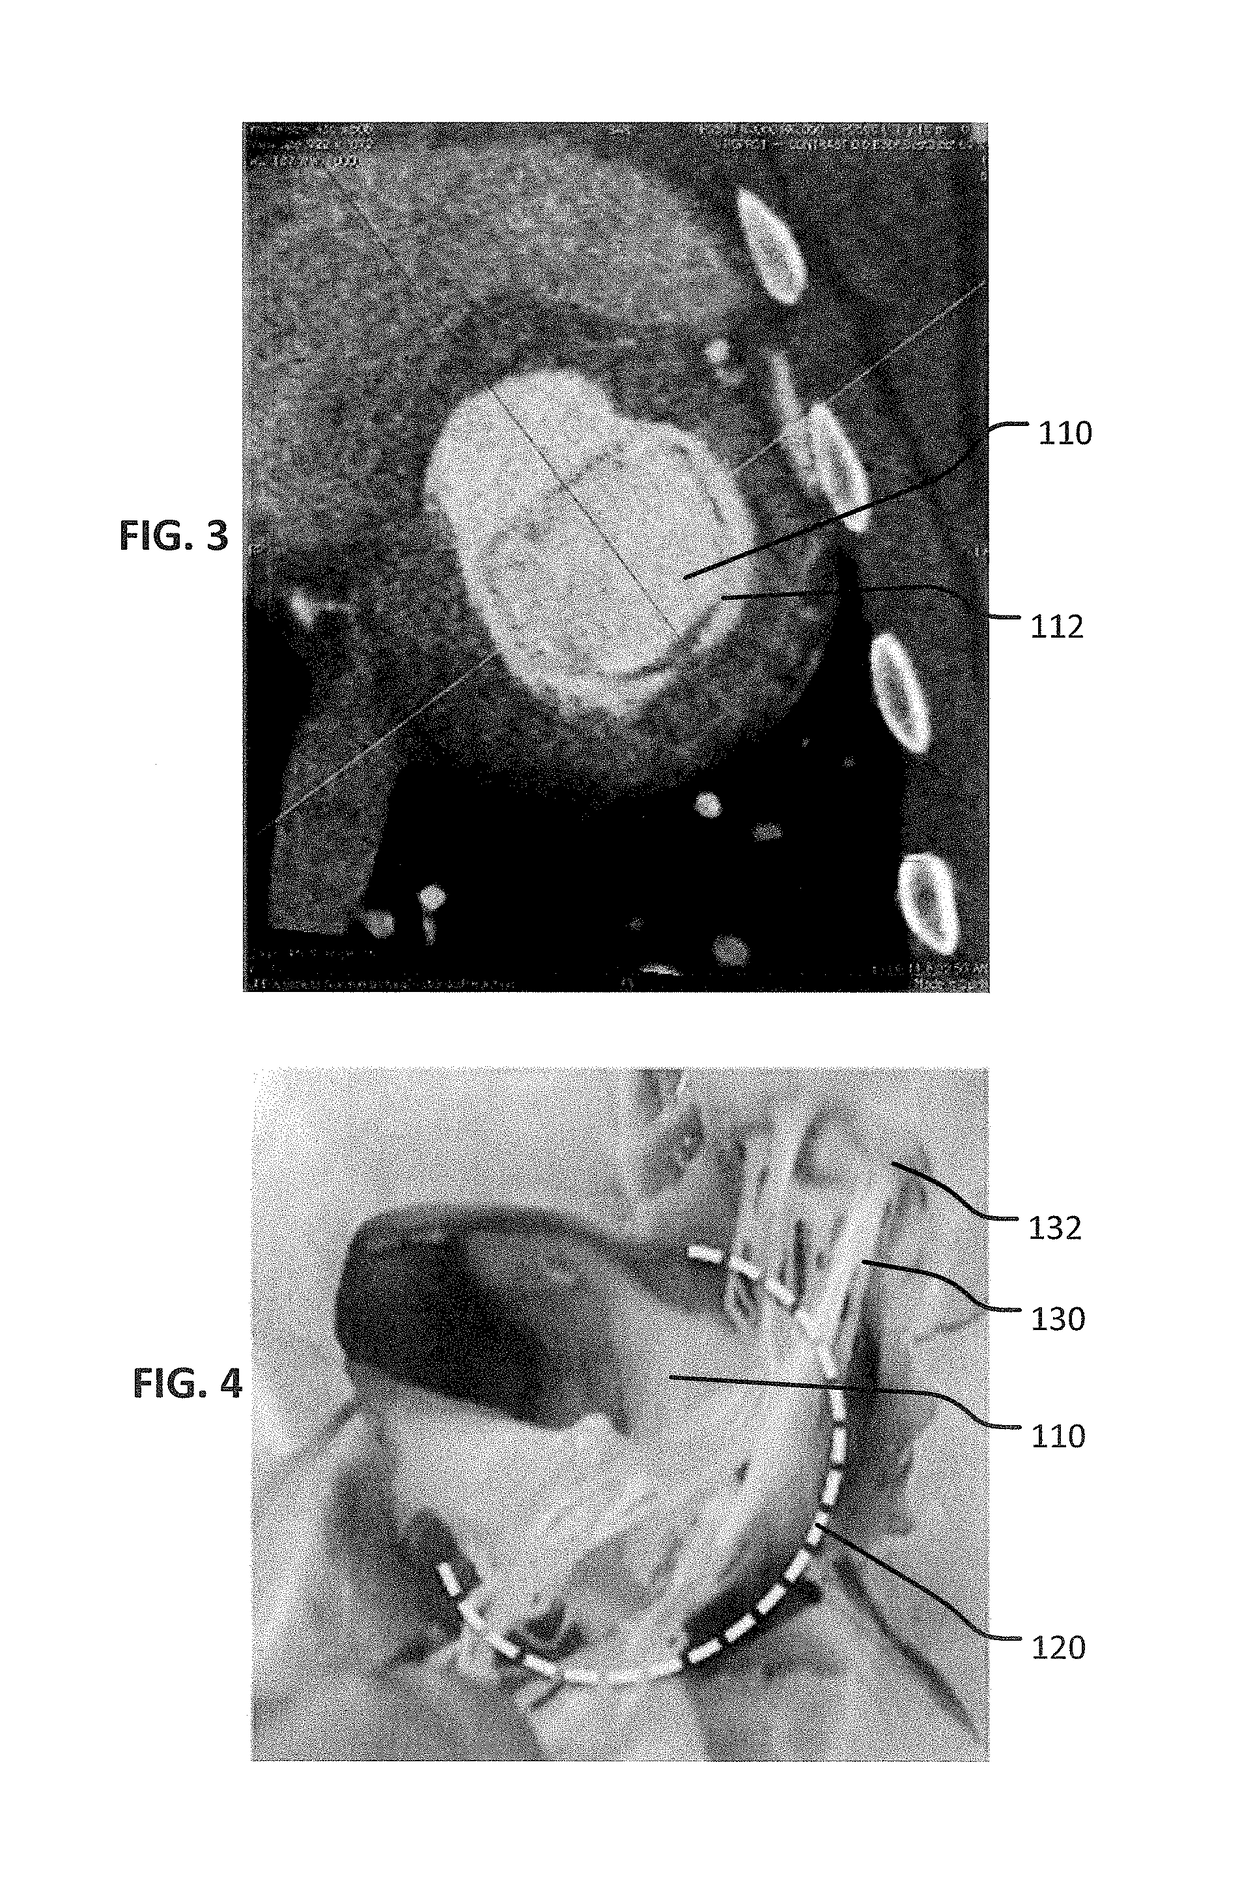 Two stage anchor and mitral valve assembly